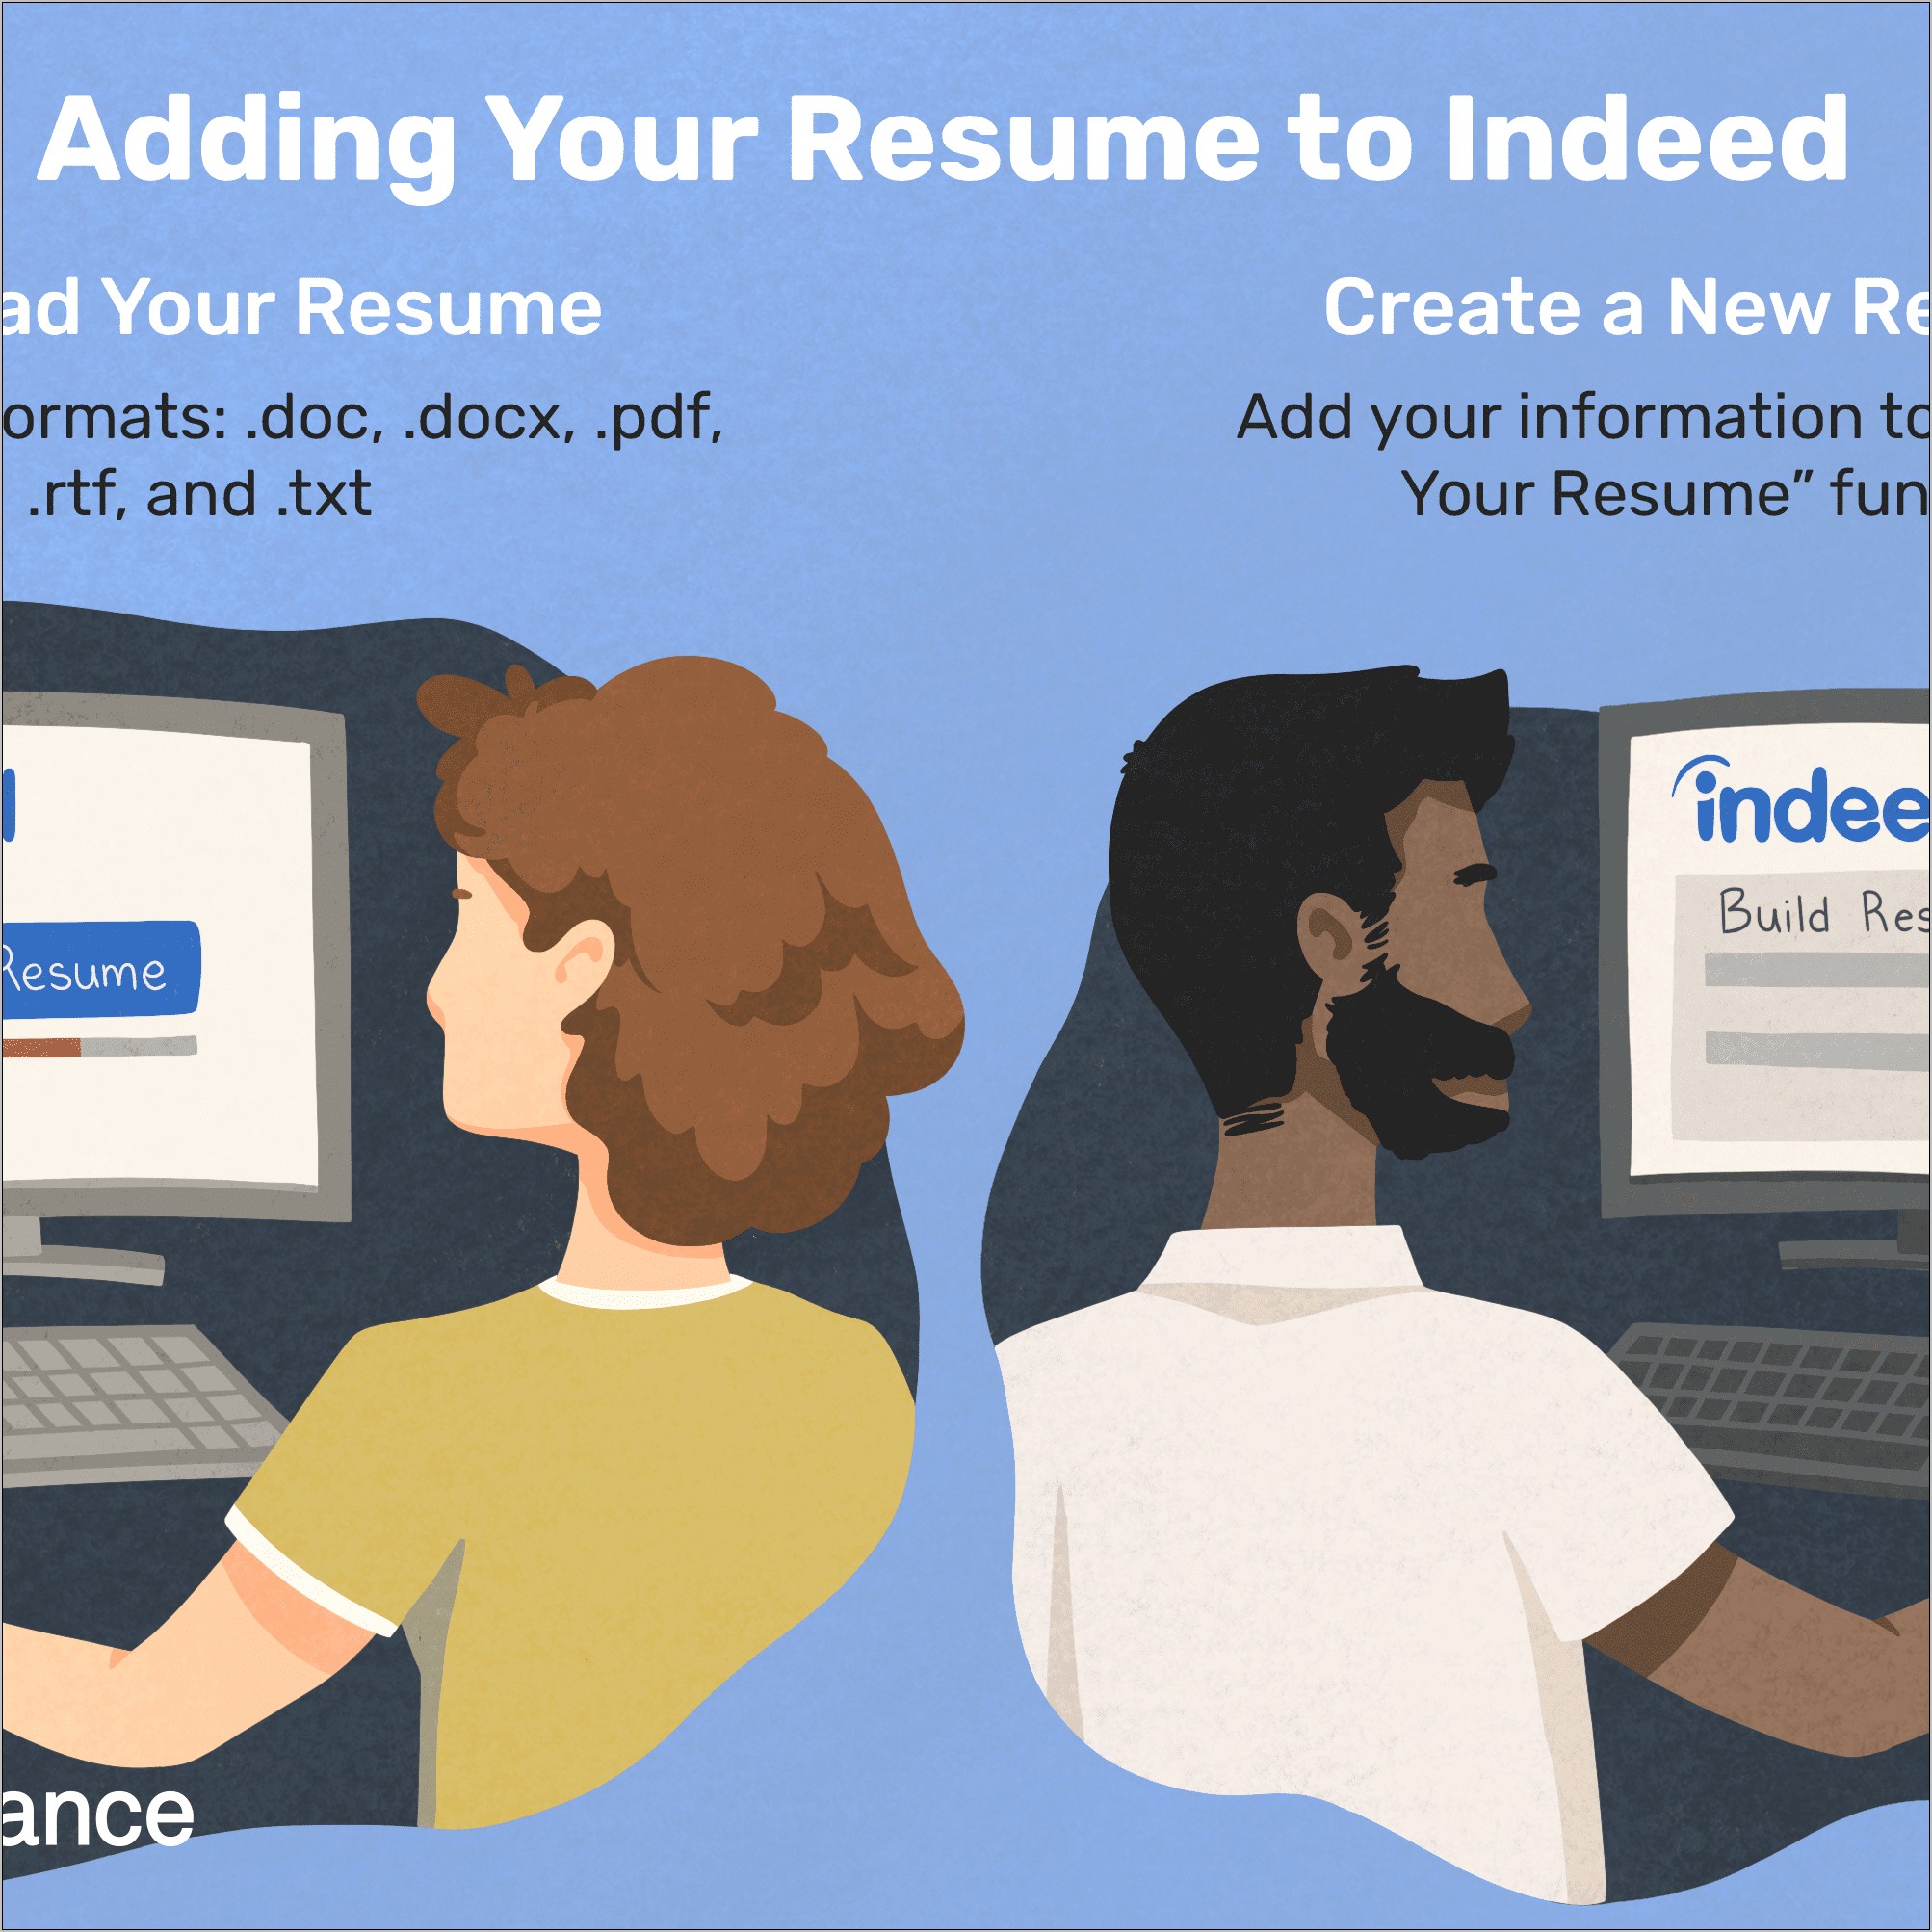 Indeed Jobs That Match My Resume